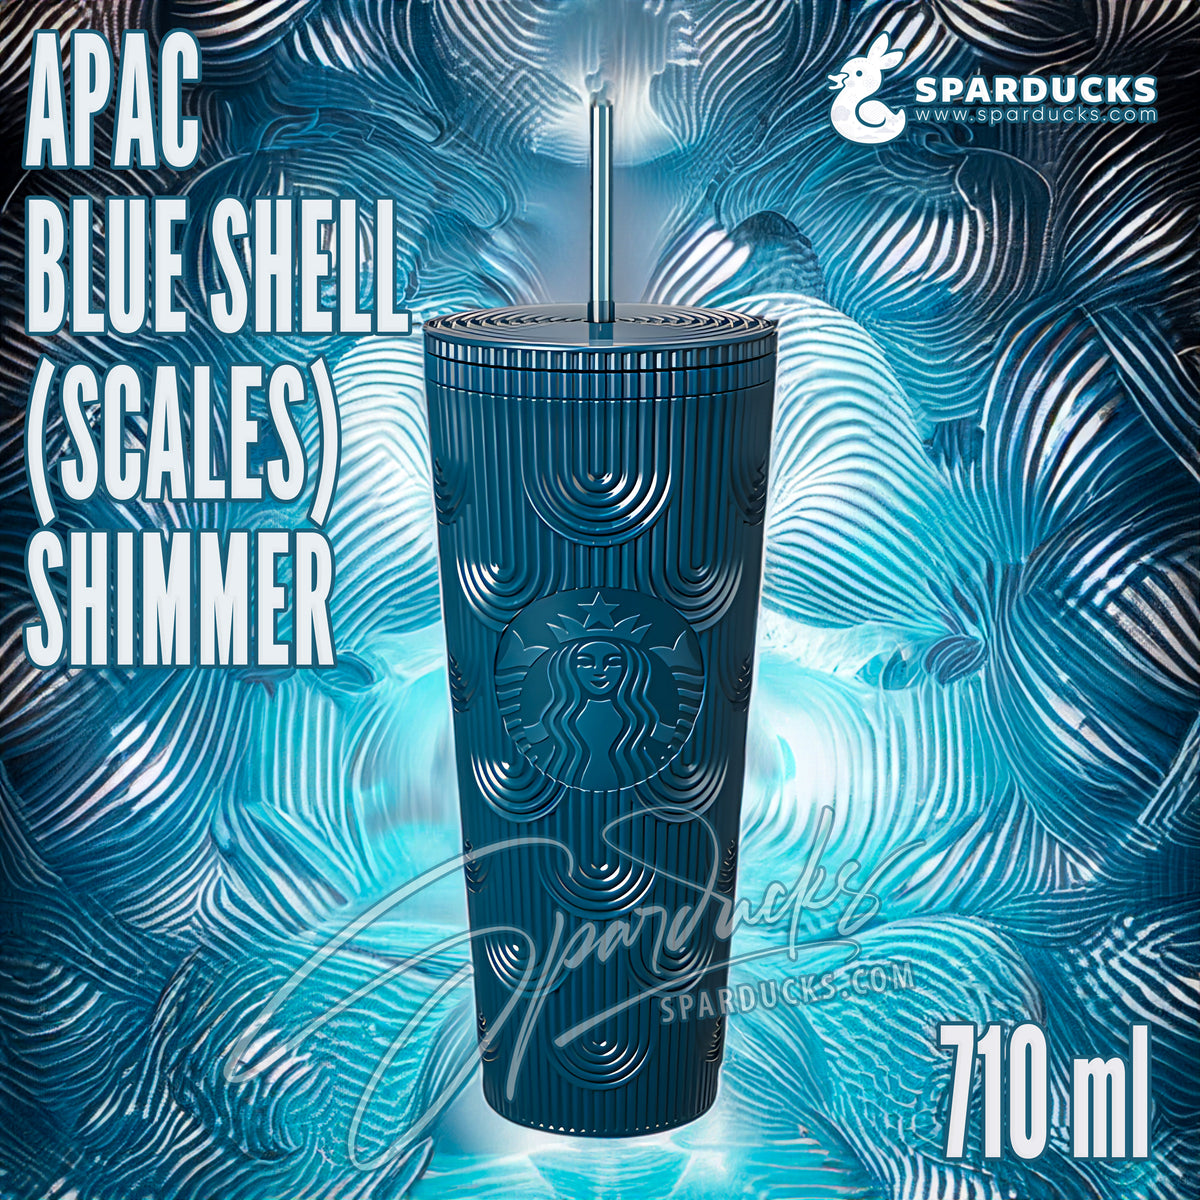 24oz APAC Blue Shell Scales Cold Cup